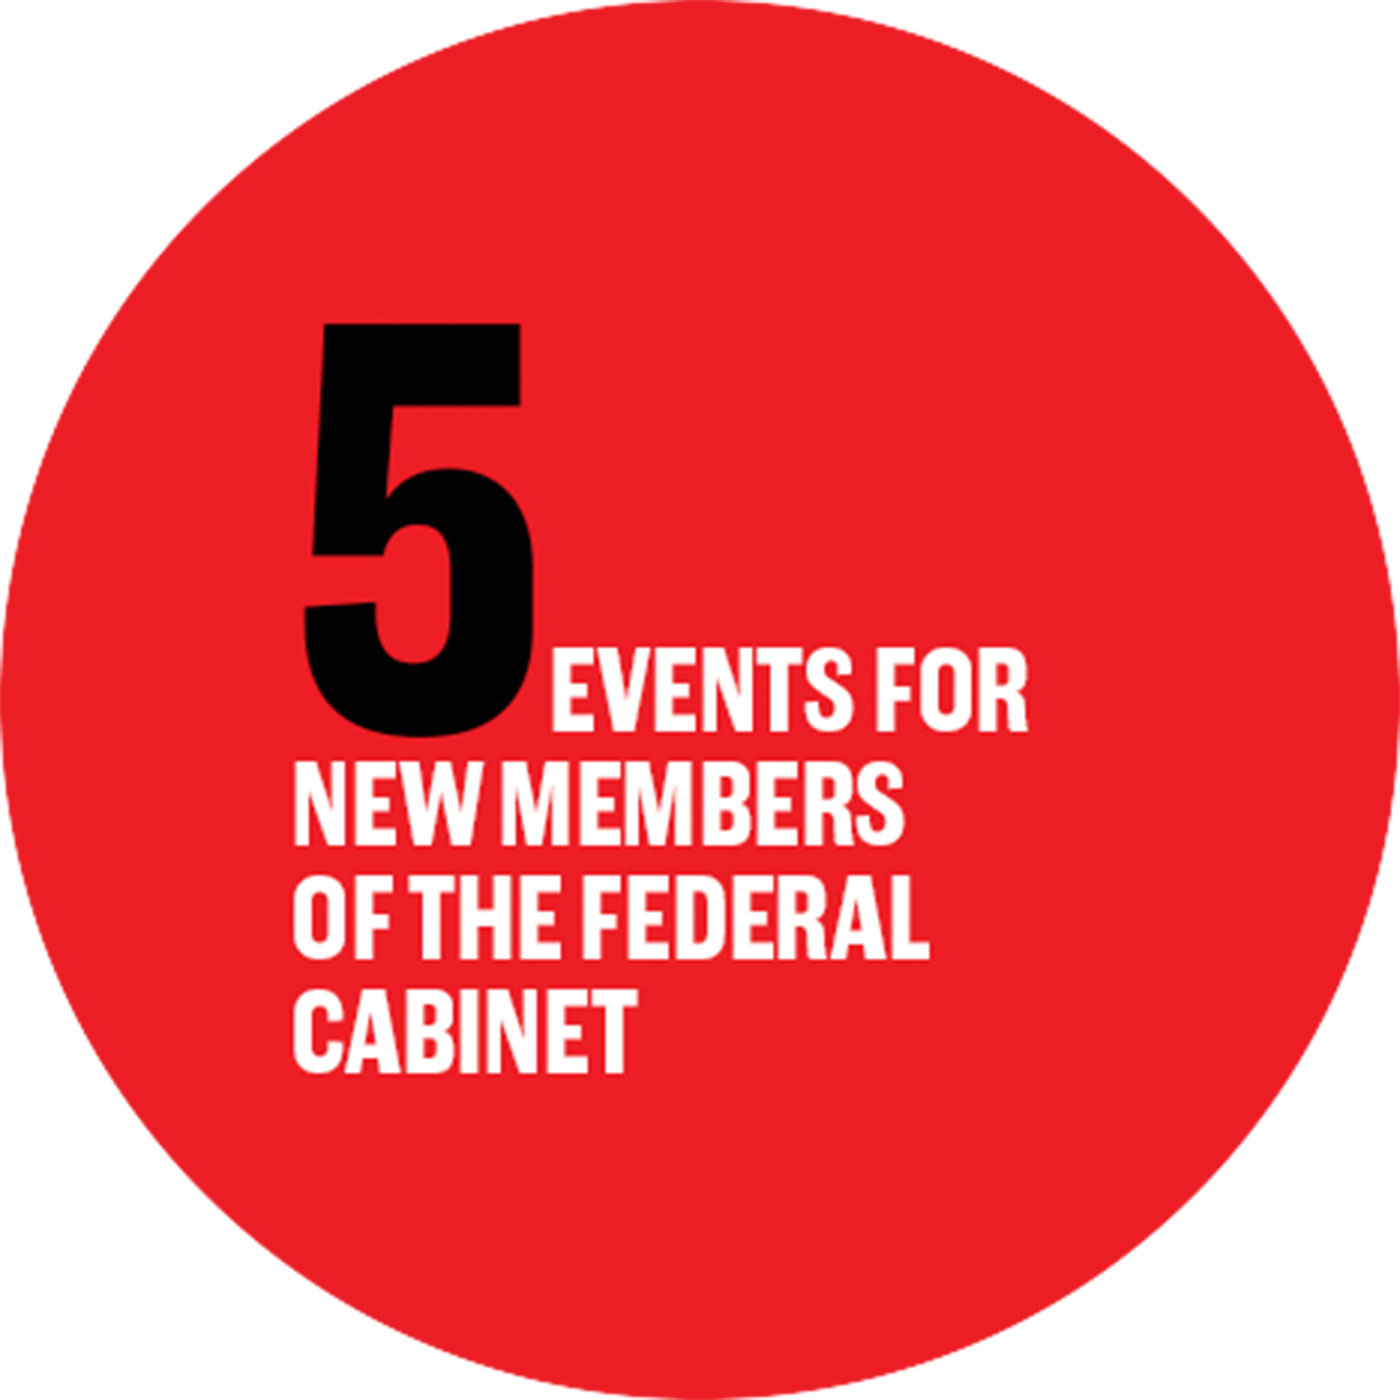 5 events for new members of the federal cabinet